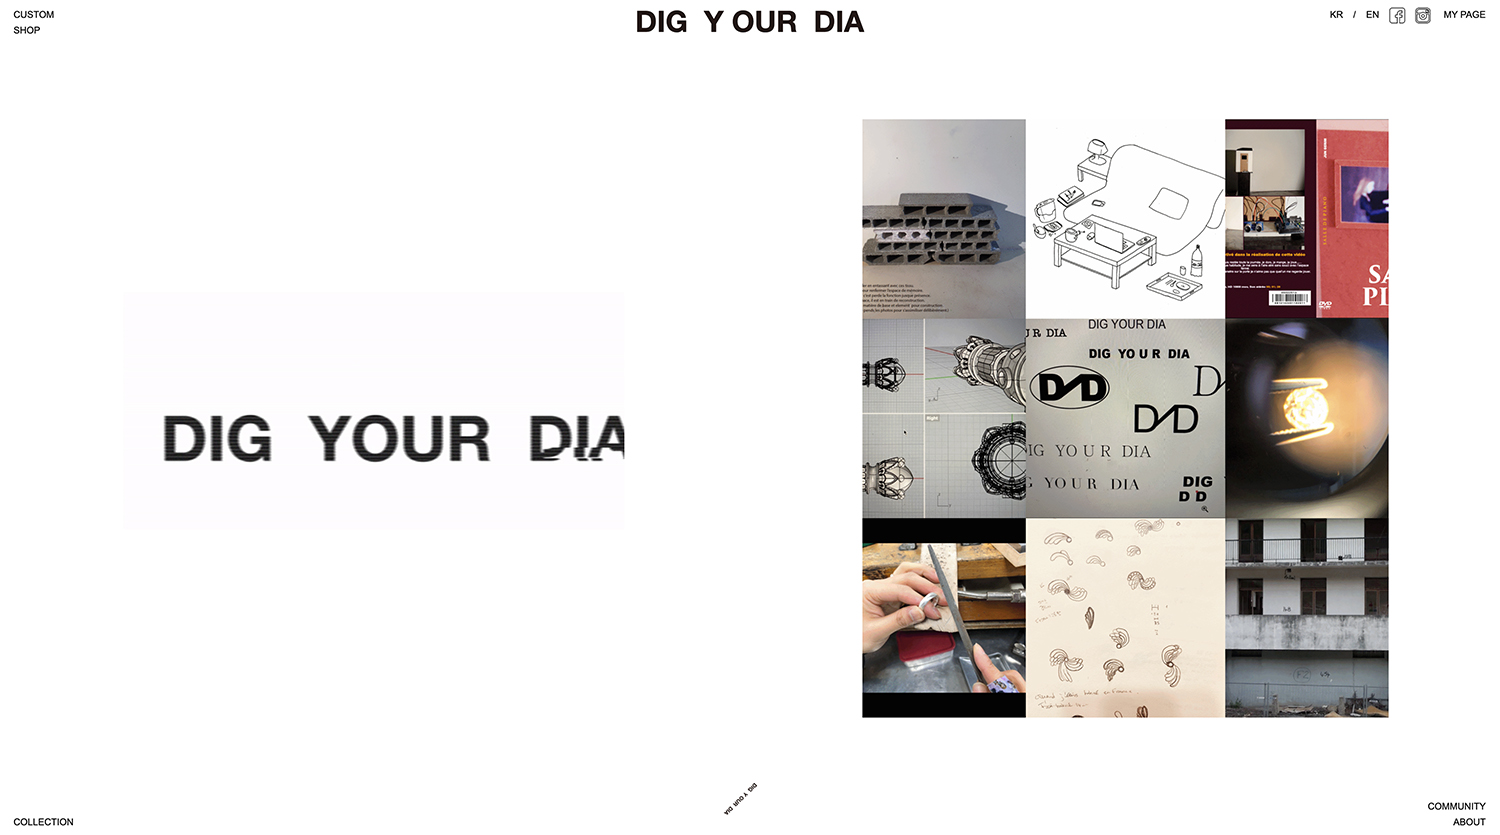 DIG YOUR DIA